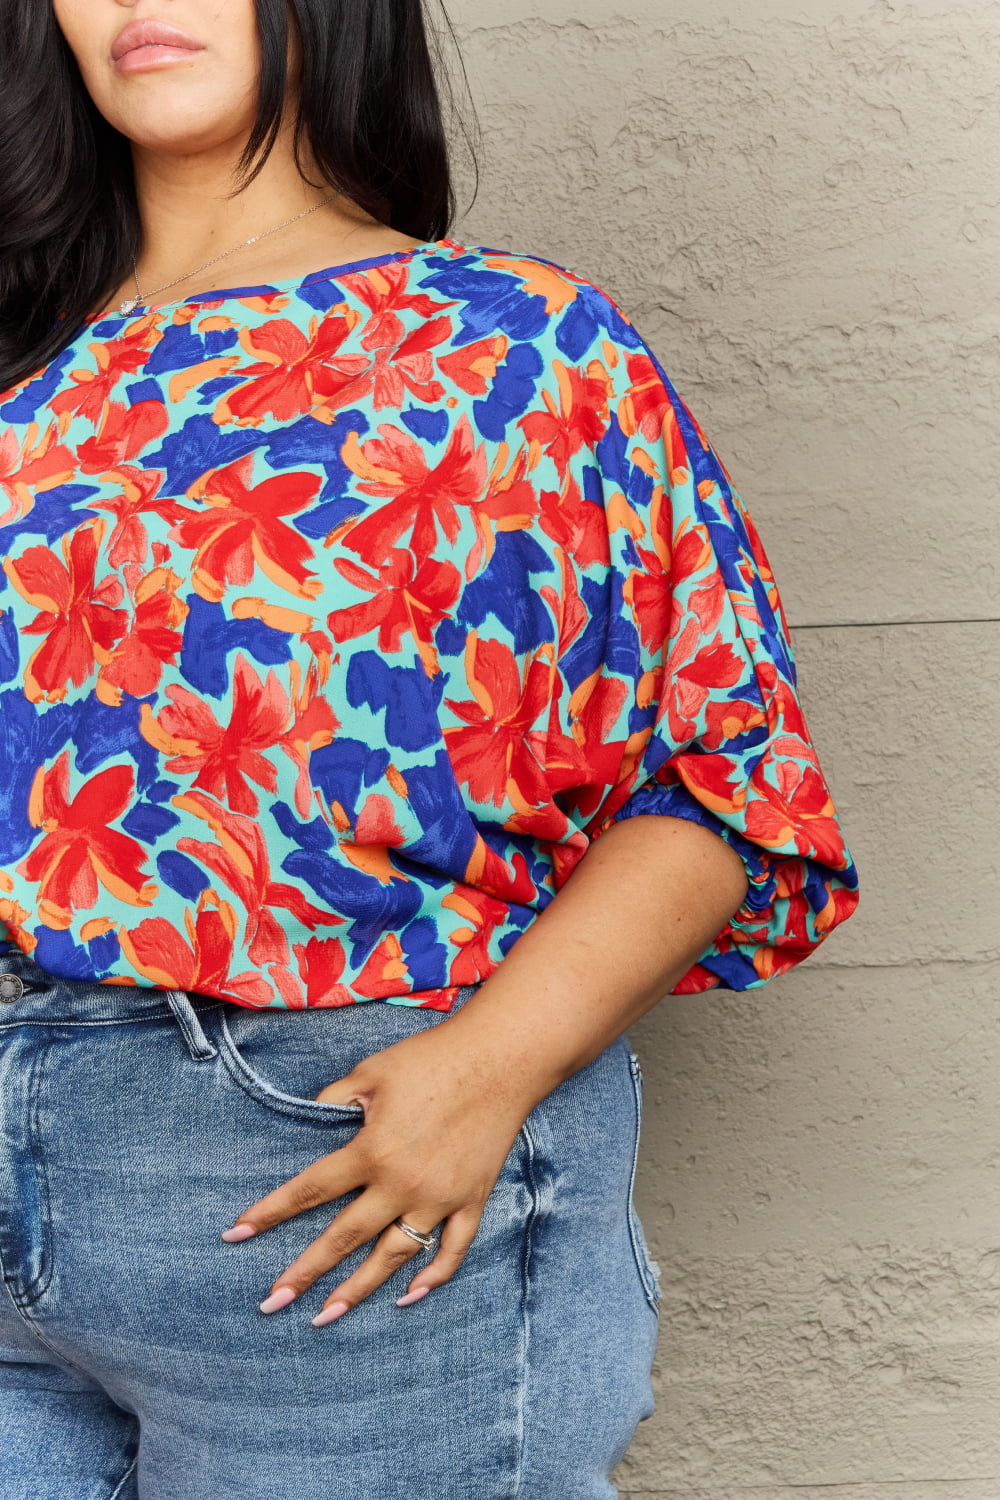 New Season Plus Size Floral Blouse - Women’s Clothing & Accessories - Shirts & Tops - 5 - 2024